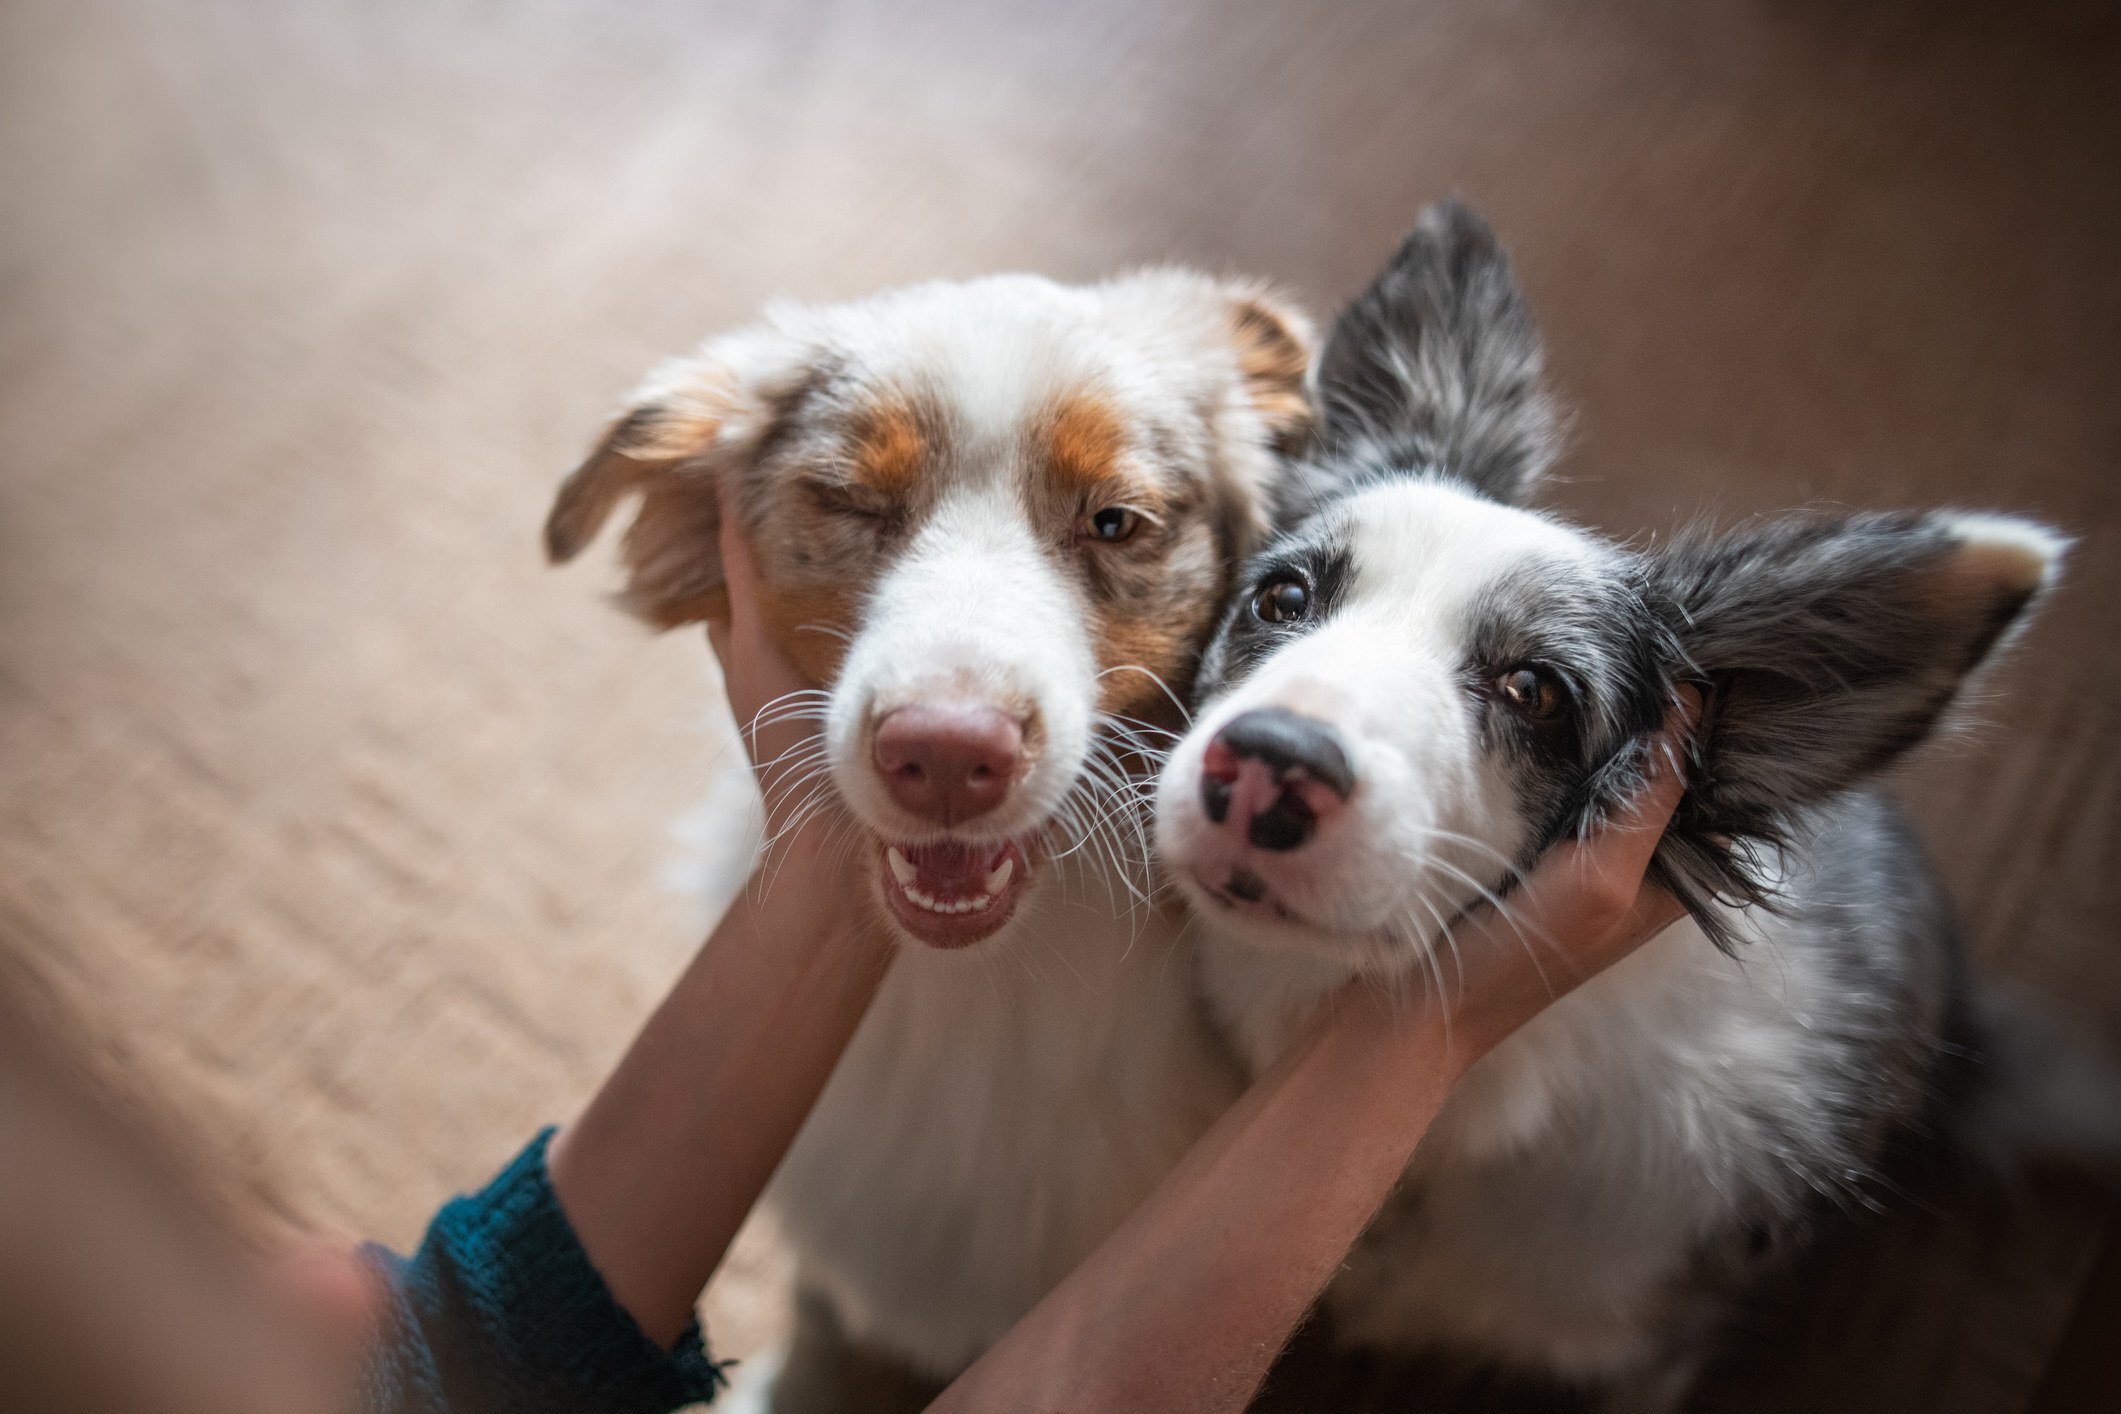 Stroking a pet can activate the release of oxytocin in the brain, which contributes to wellbeing and ability to handle stress, studies have found. Photo: Getty Images